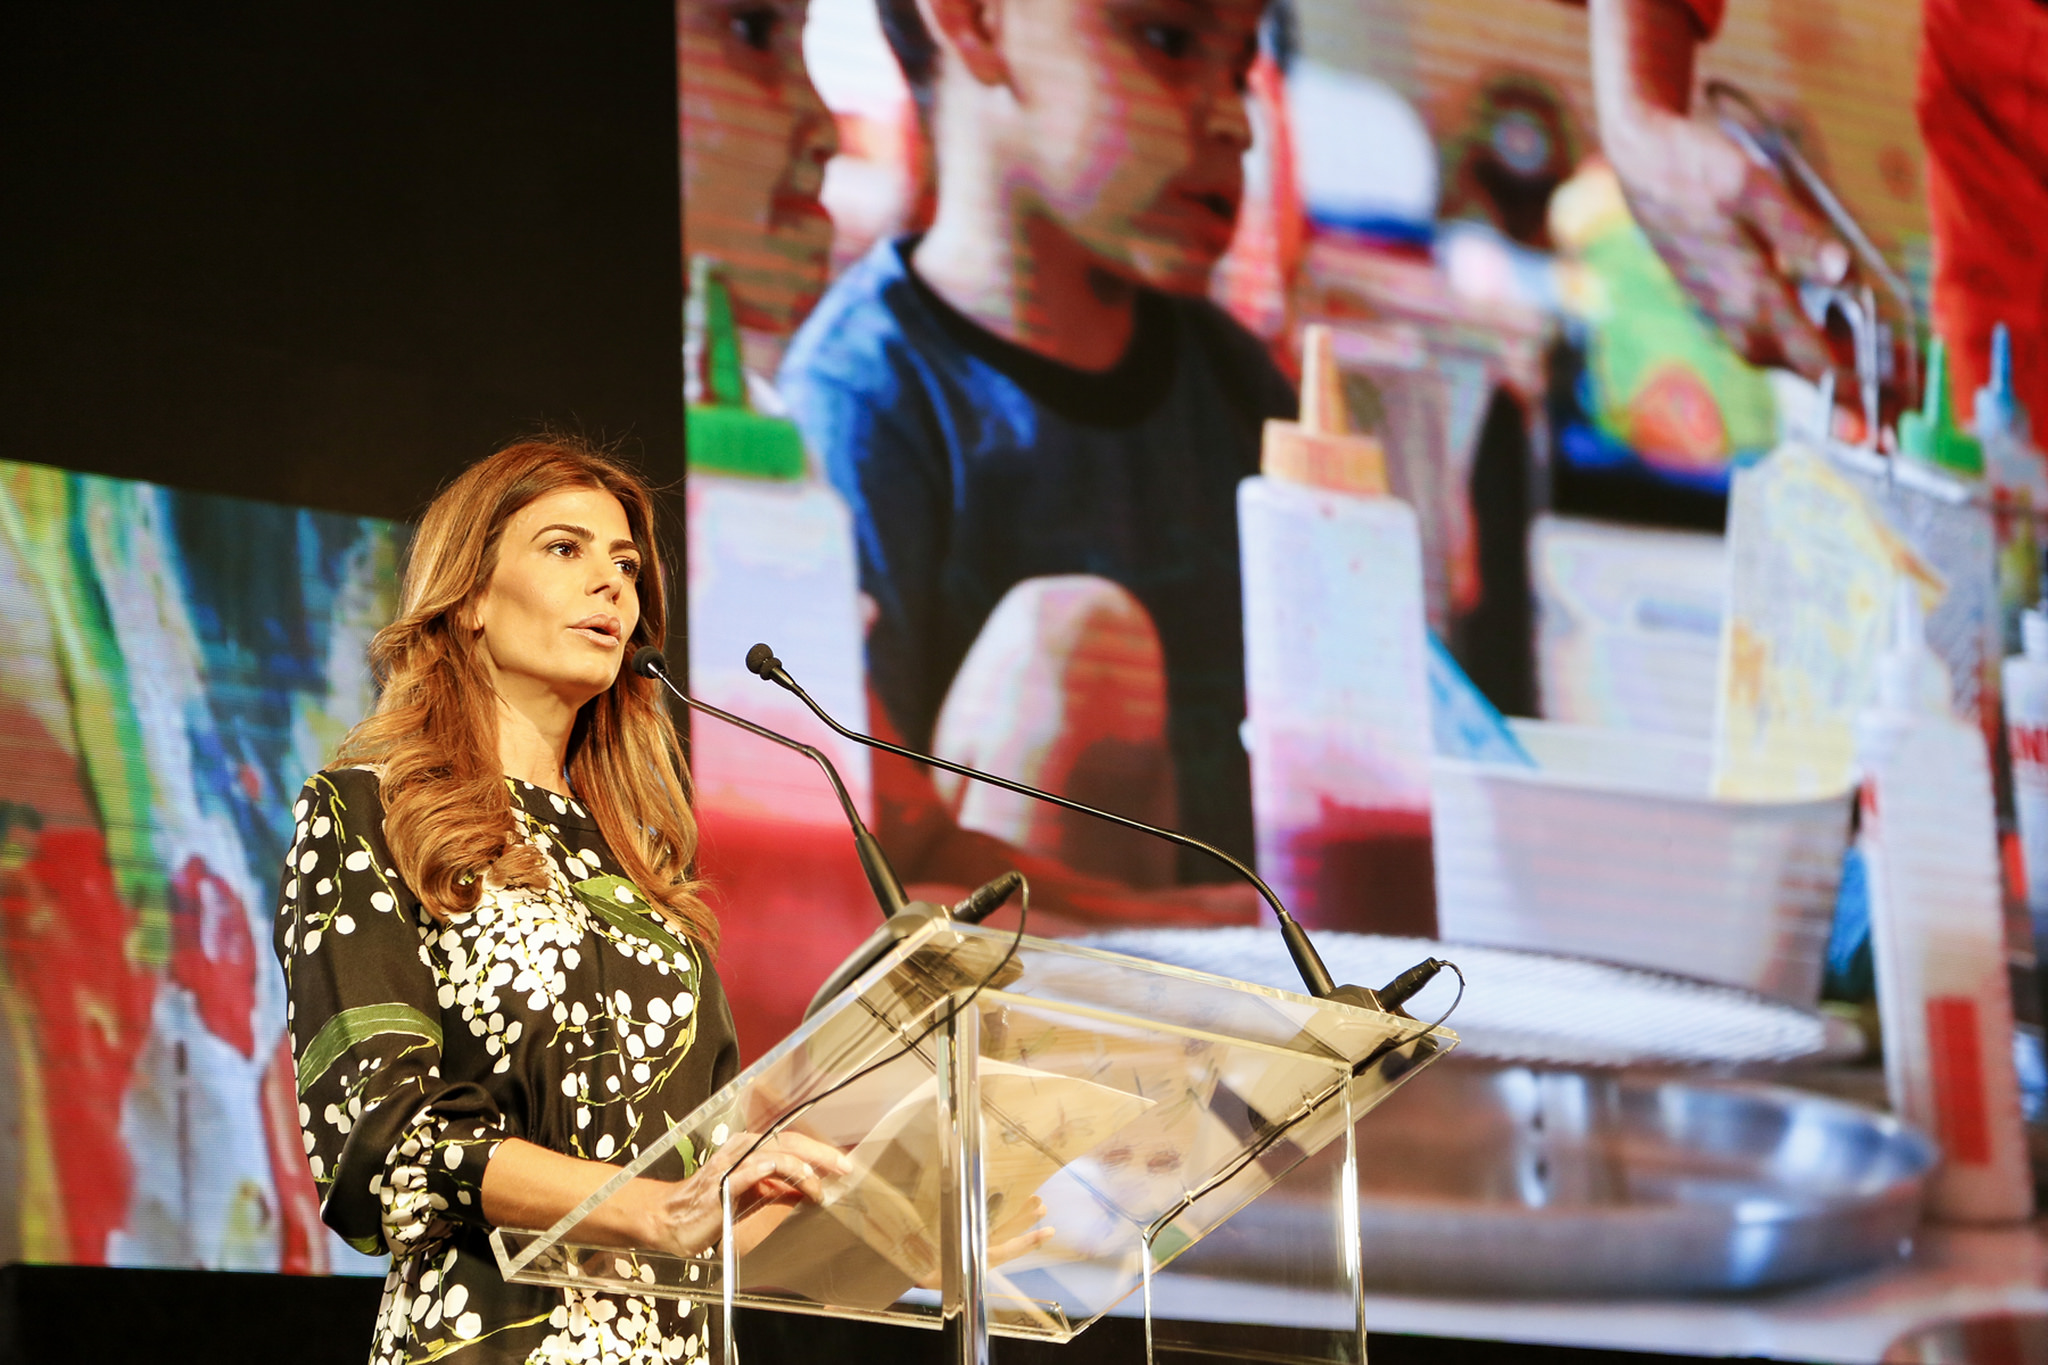 Argentine First Lady Juliana Awada at the G20: “Early childhood development is the best way to build our future”